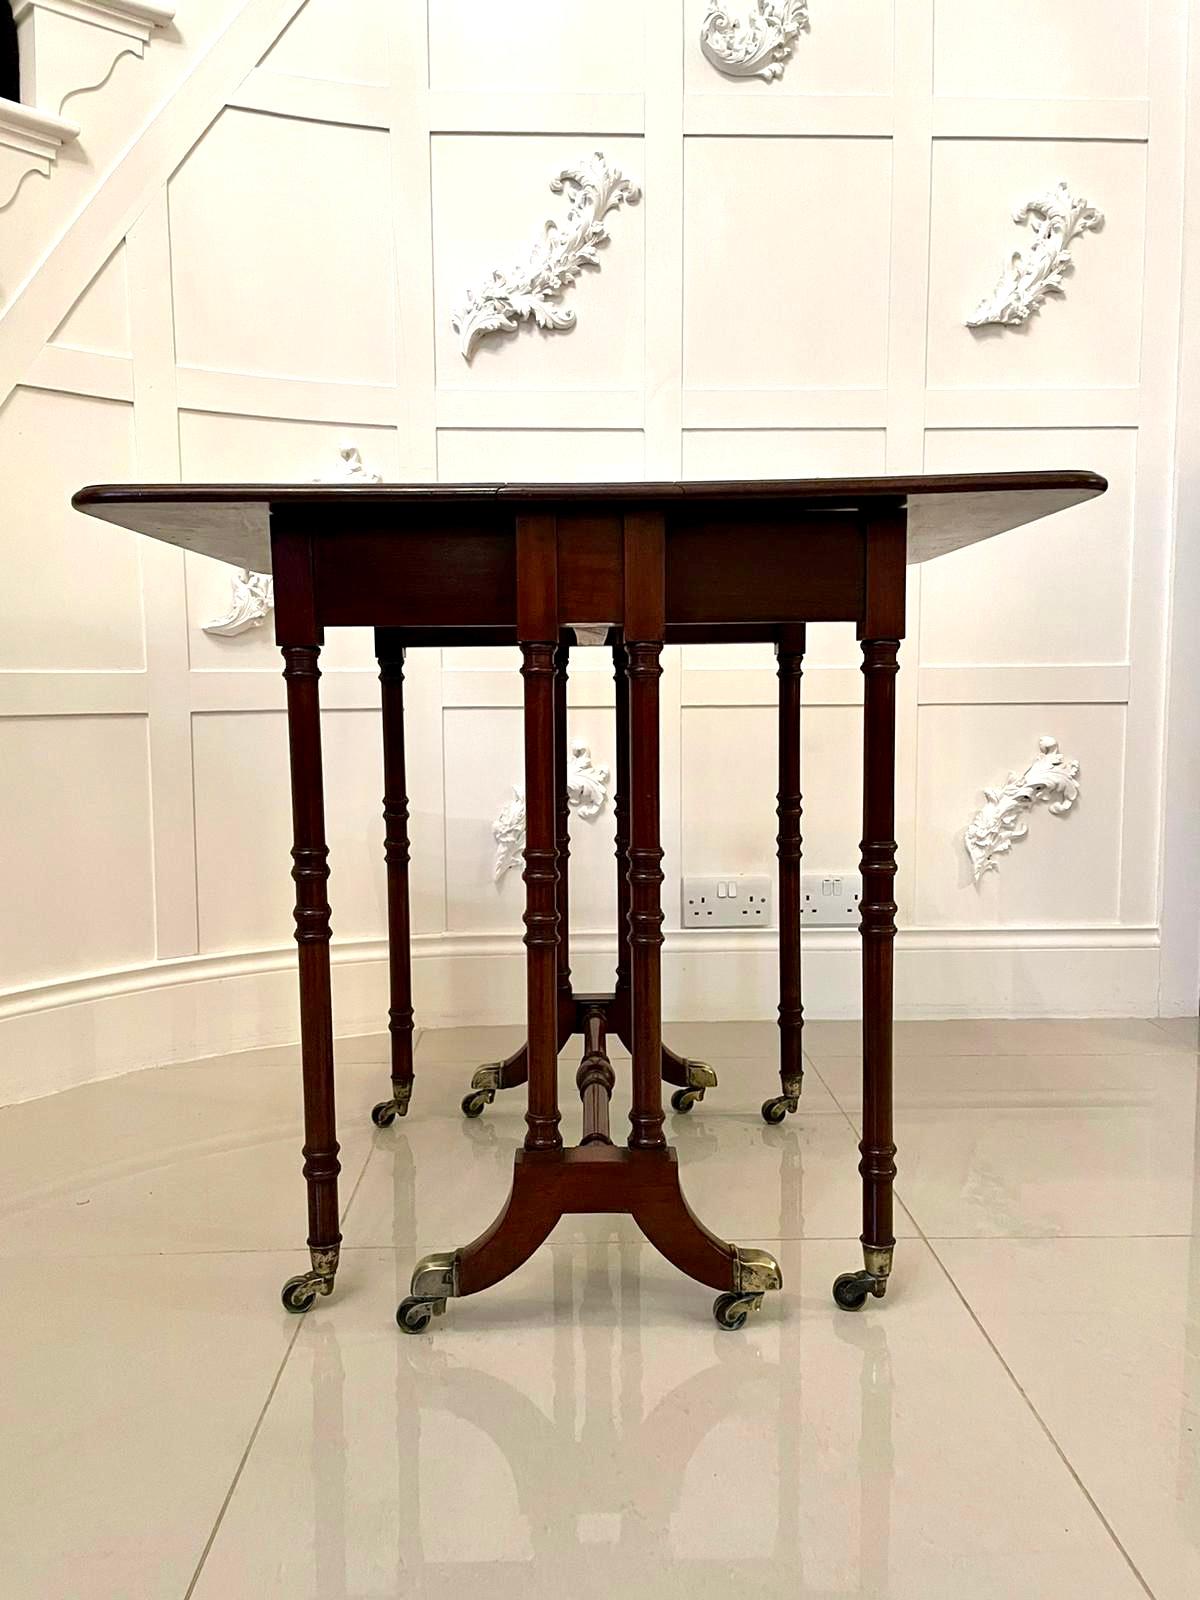 Other Antique Early 19th Century George III Mahogany Spider Leg Drop-Leaf Table For Sale